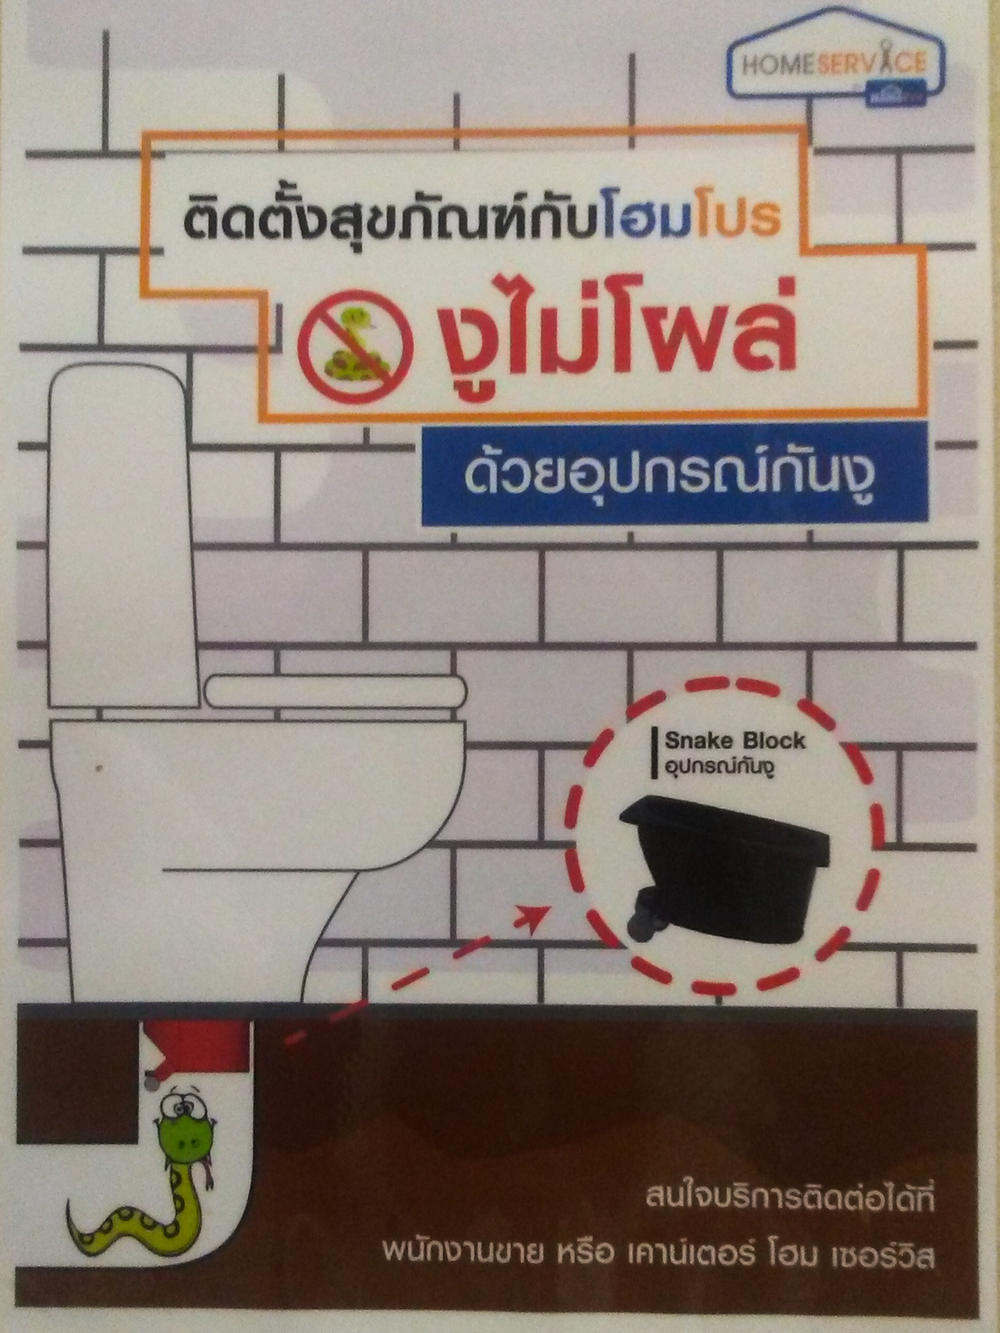 Cedric Yoshimoto spotted this advertisement in the bathroom of a home improvement store in Thailand. 